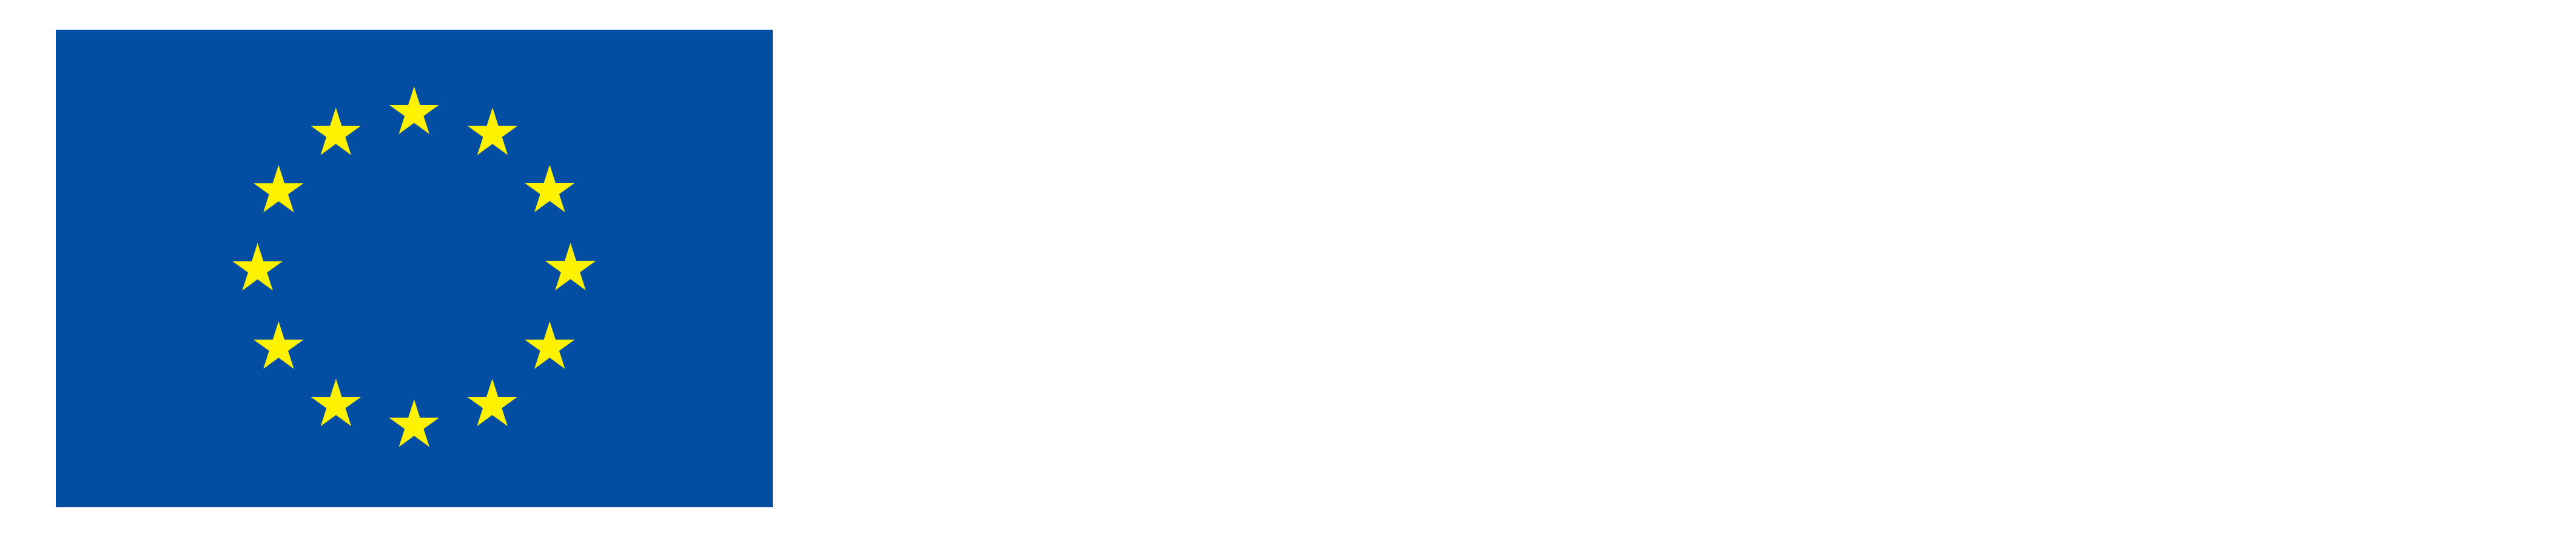 EN Co-Funded by the EU_NEG.png